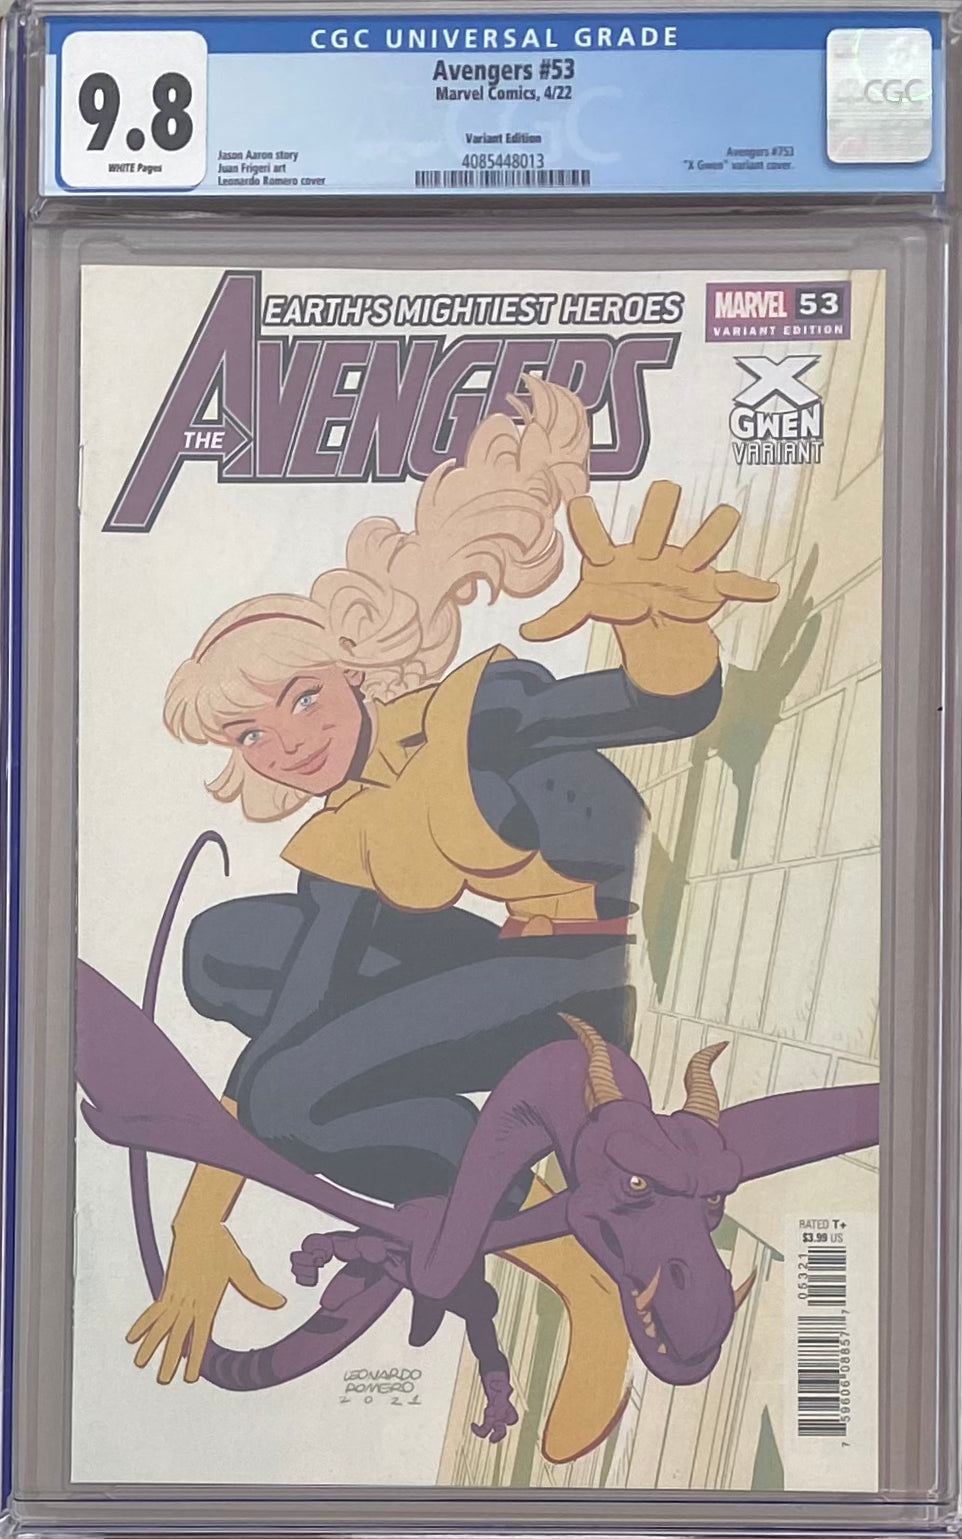 Avengers #53 Romero X-Gwen Variant CGC 9.8 - First Red Panther Suit